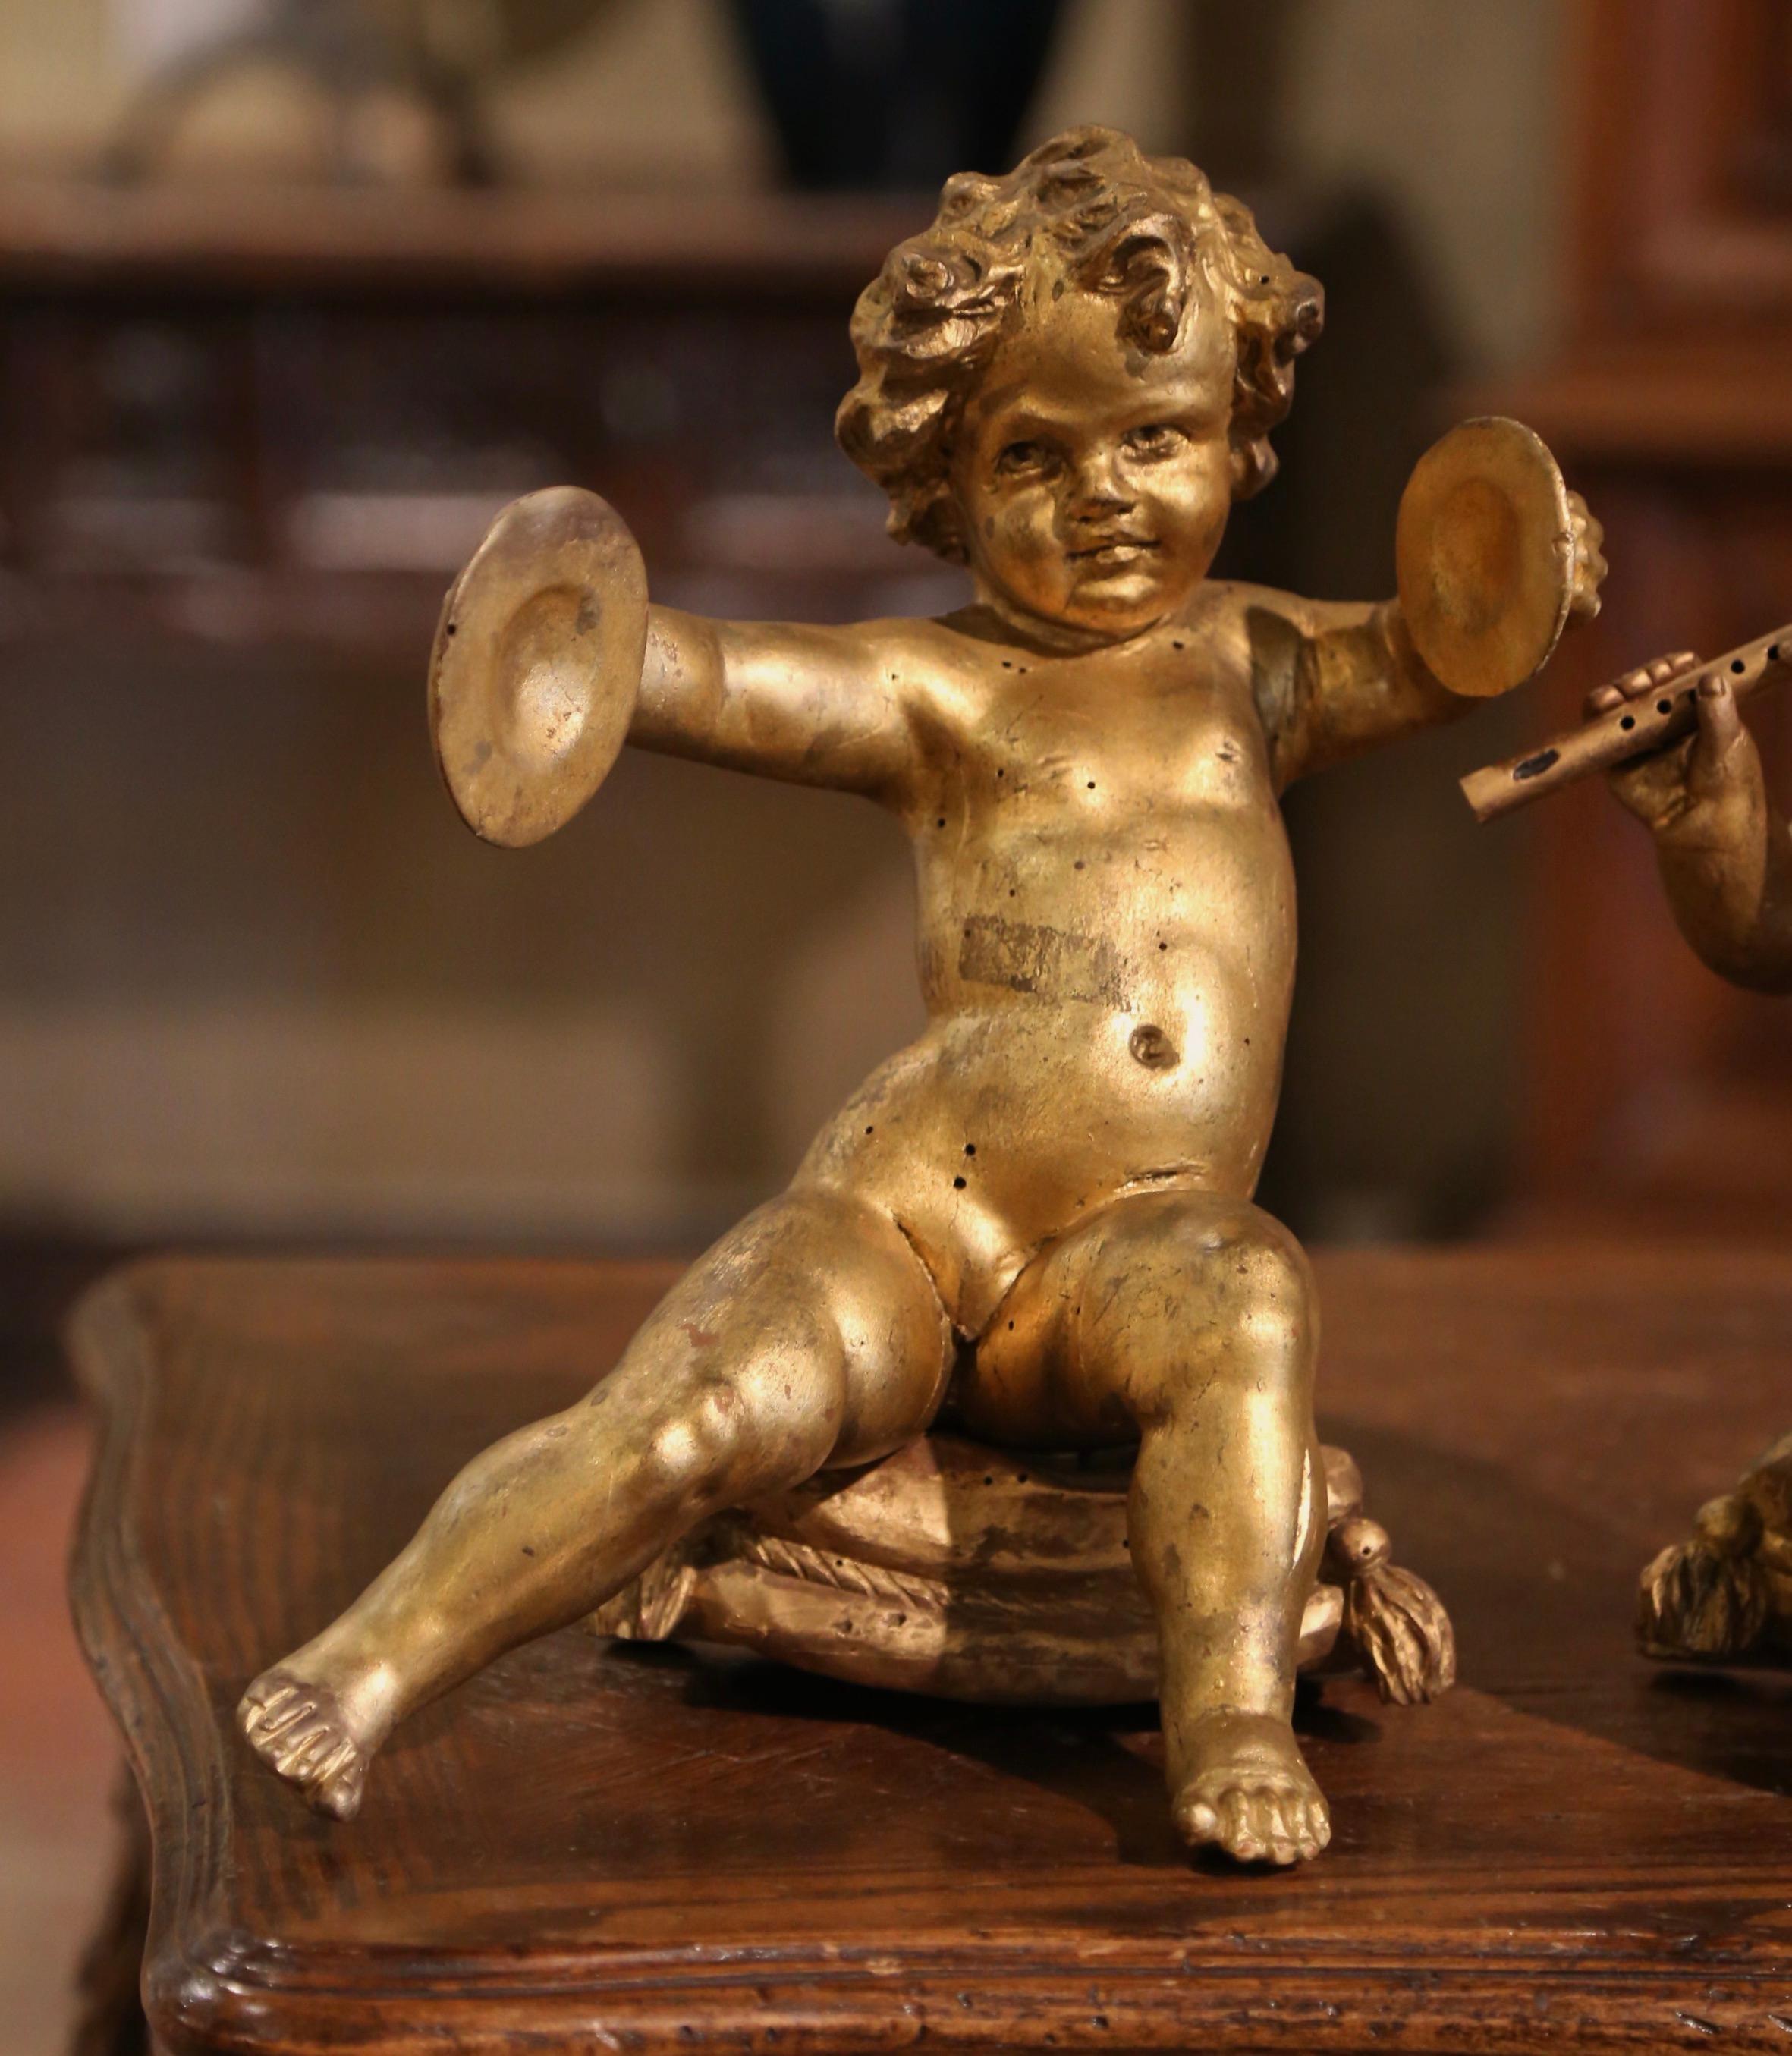 These charming antique putti carvings were crafted in Italy, circa 1780. The hand carved figures depict two musicians cupids sited on a pillow form stool; one playing the flute, the other holding cymbals. Each sculpture features its original gold